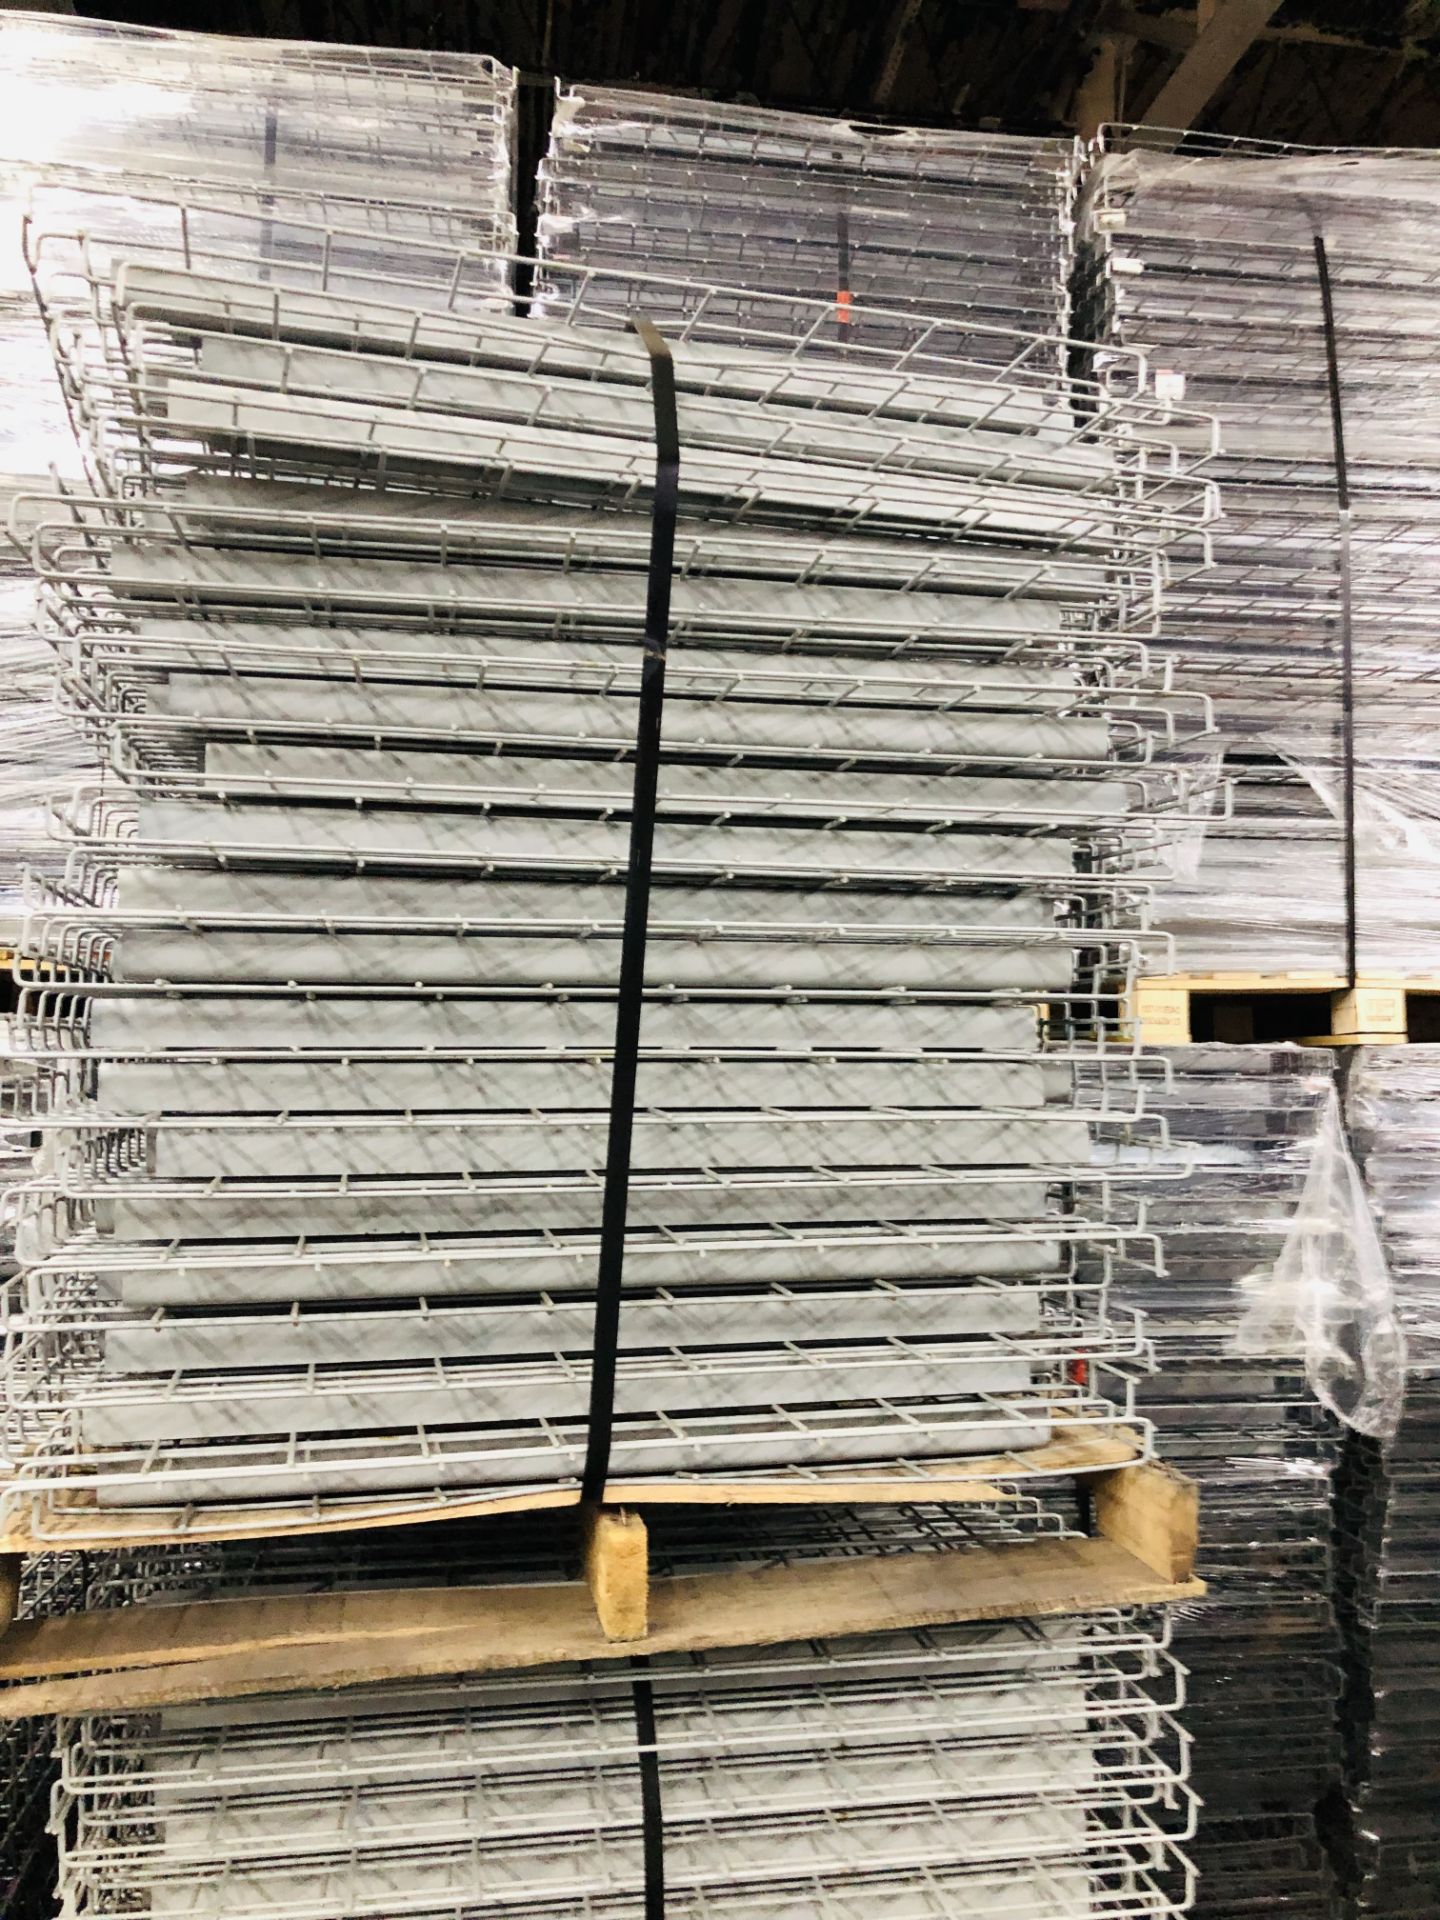 USED 40 PCS OF STANDARD 36" X 46" WIREDECK